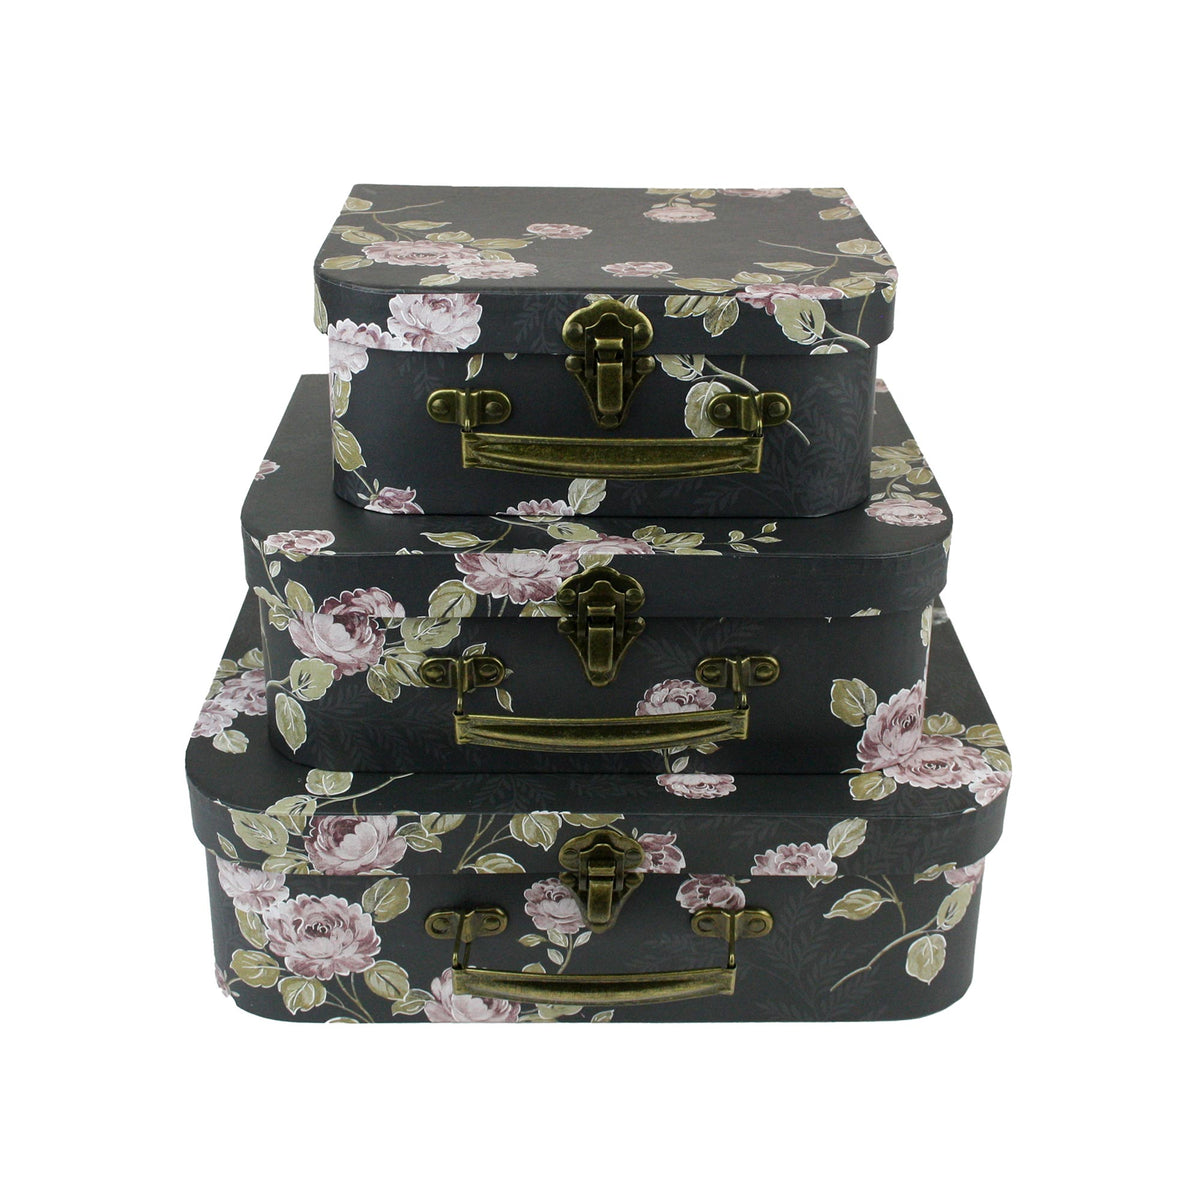 Black Floral Print Suitcase Gift Boxes - Set of 3